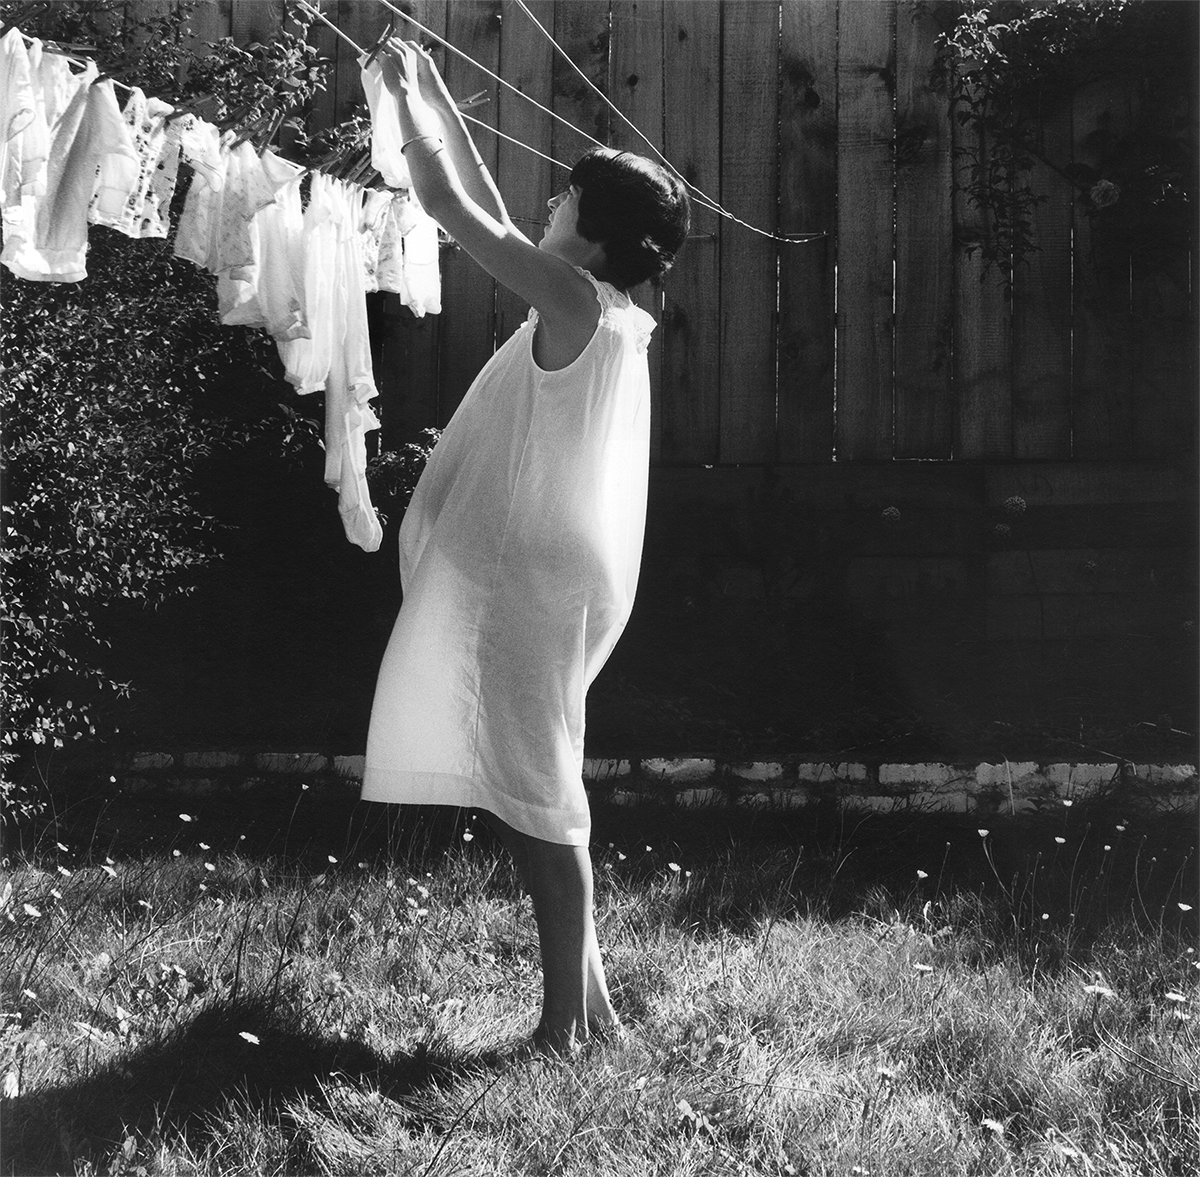 In this black-and-white photo, a light-skinned woman with short, dark hair stands in a backyard, hanging what looks to be baby clothes on a clothesline that is attached to w wooden fence. She wears a white sleeveless nightgown, under which the outline of her pregnant body is visible as the sun illuminates her and makes the gown transparent.